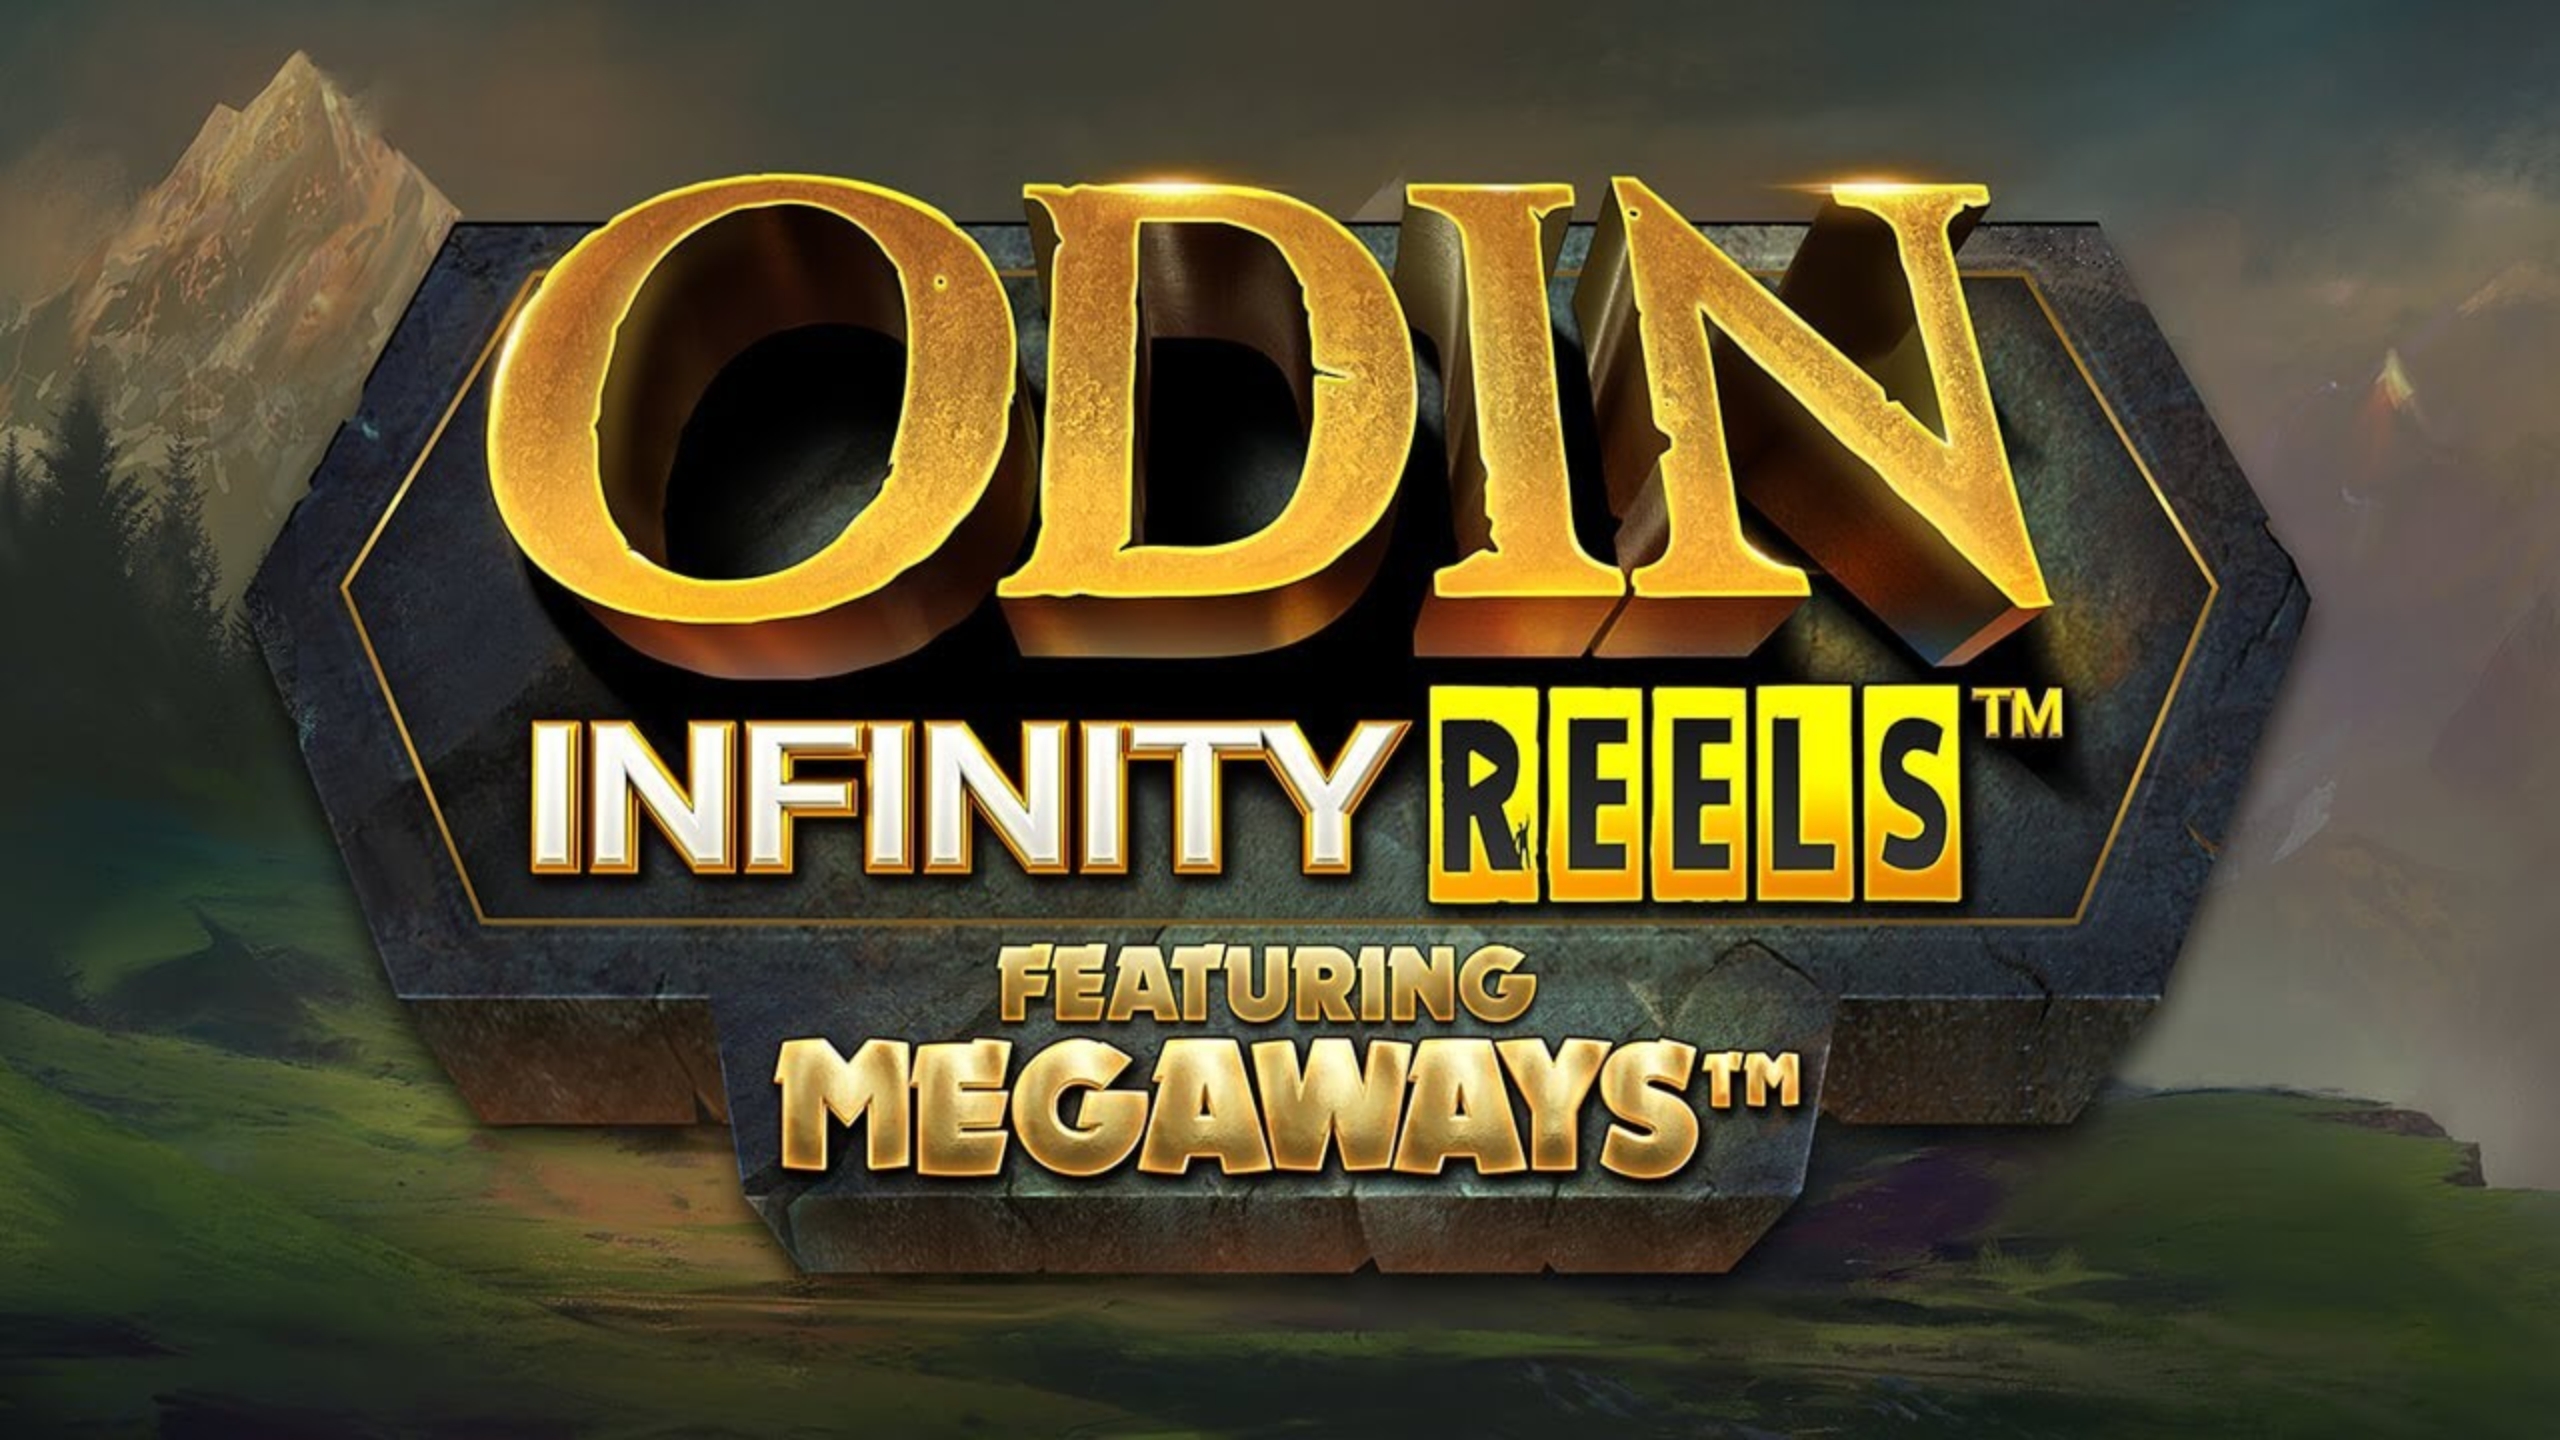 The Odin Infinity Reels Megaways Online Slot Demo Game by Reel Play